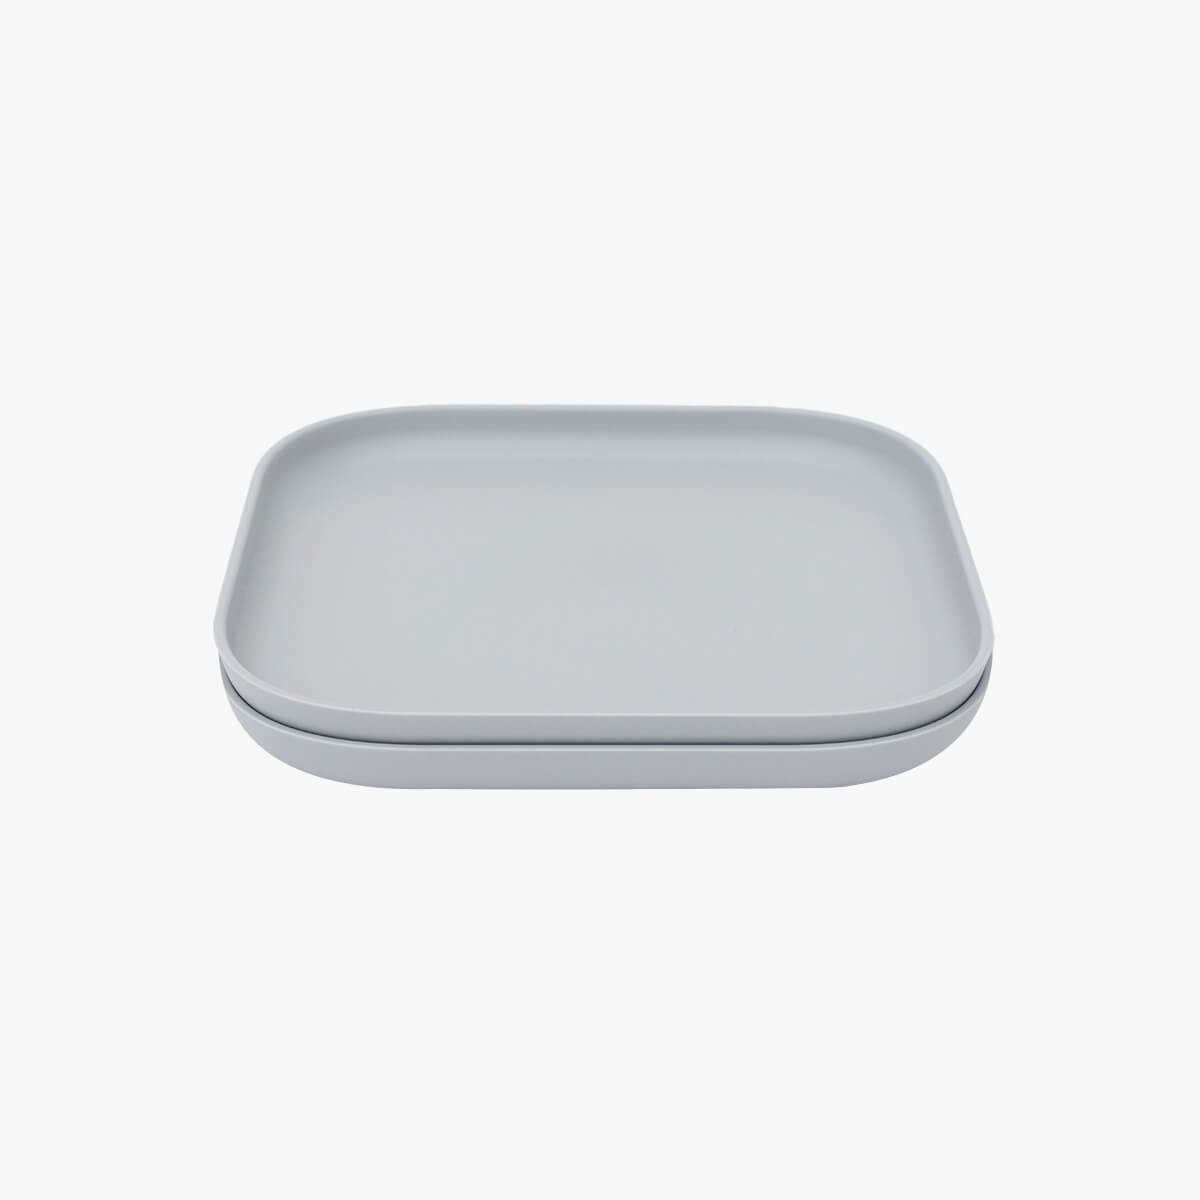 Mealtime Plate in Pewter / ezpz Basics Line / Stylish, Durable Plates for Big Kids